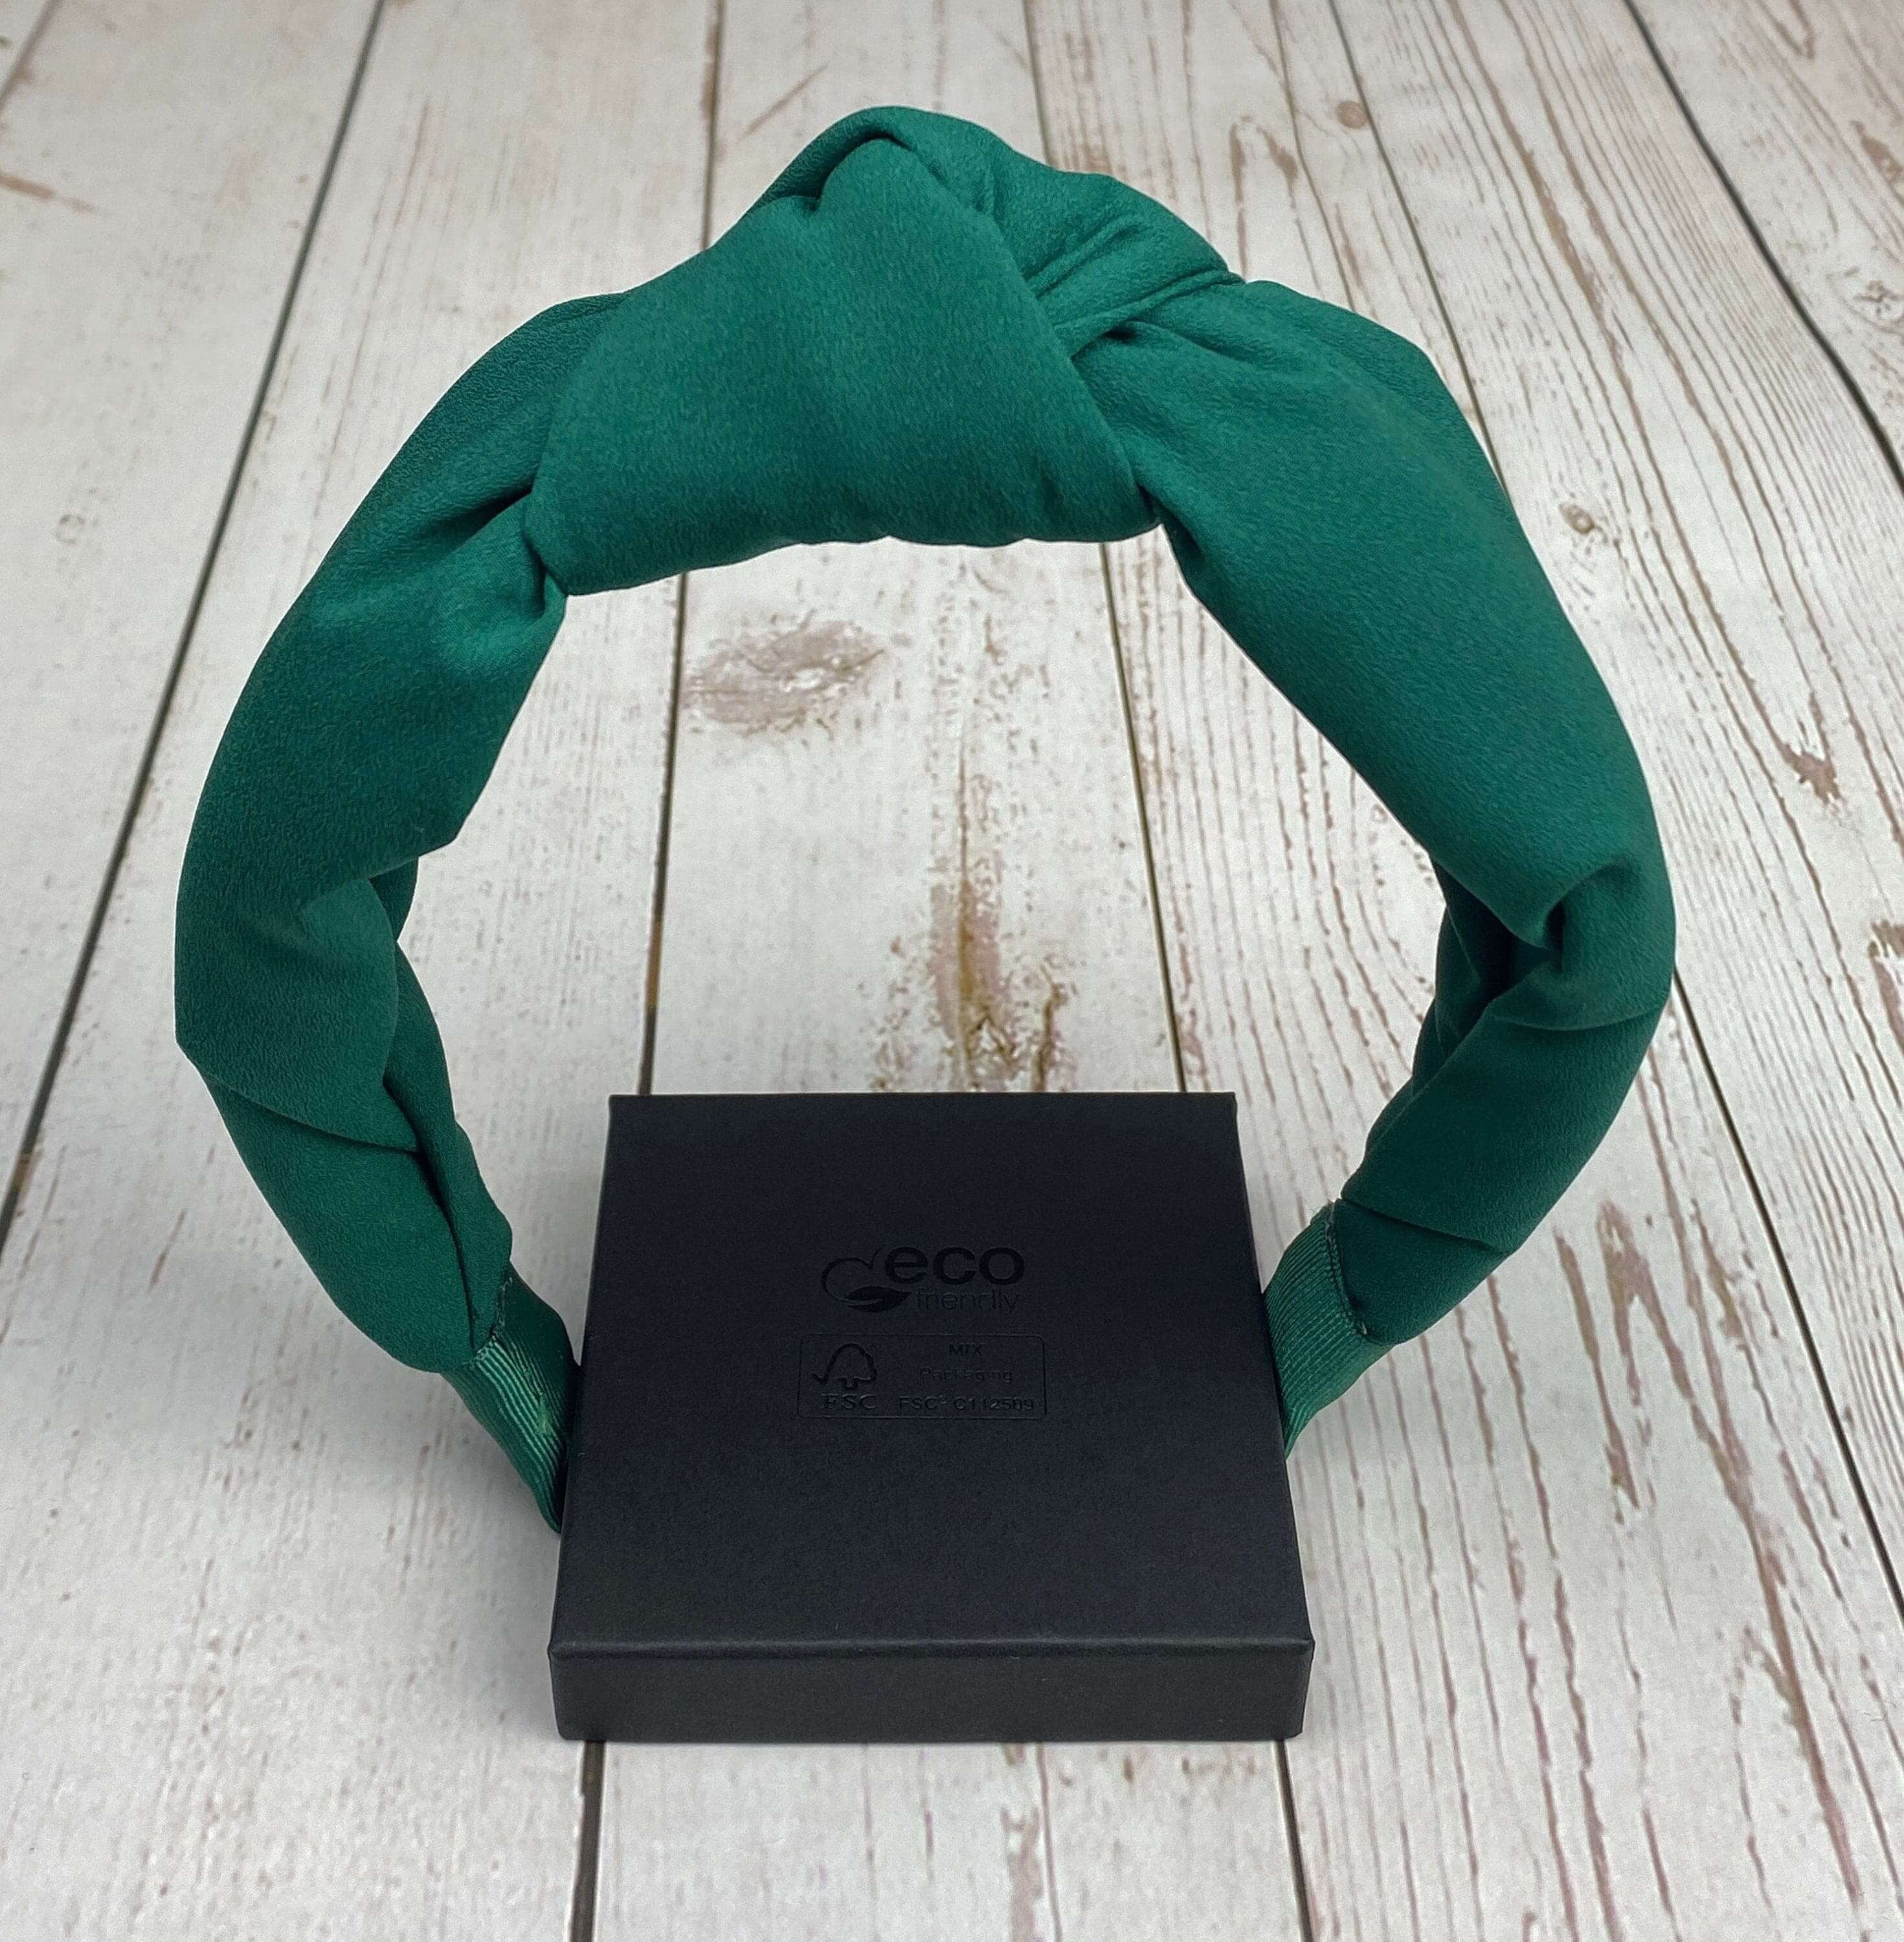 Find the perfect headband for women in various colors and styles at Alice Band. Our wide selection of headbands for women includes dark green, knotted headbands, and more.